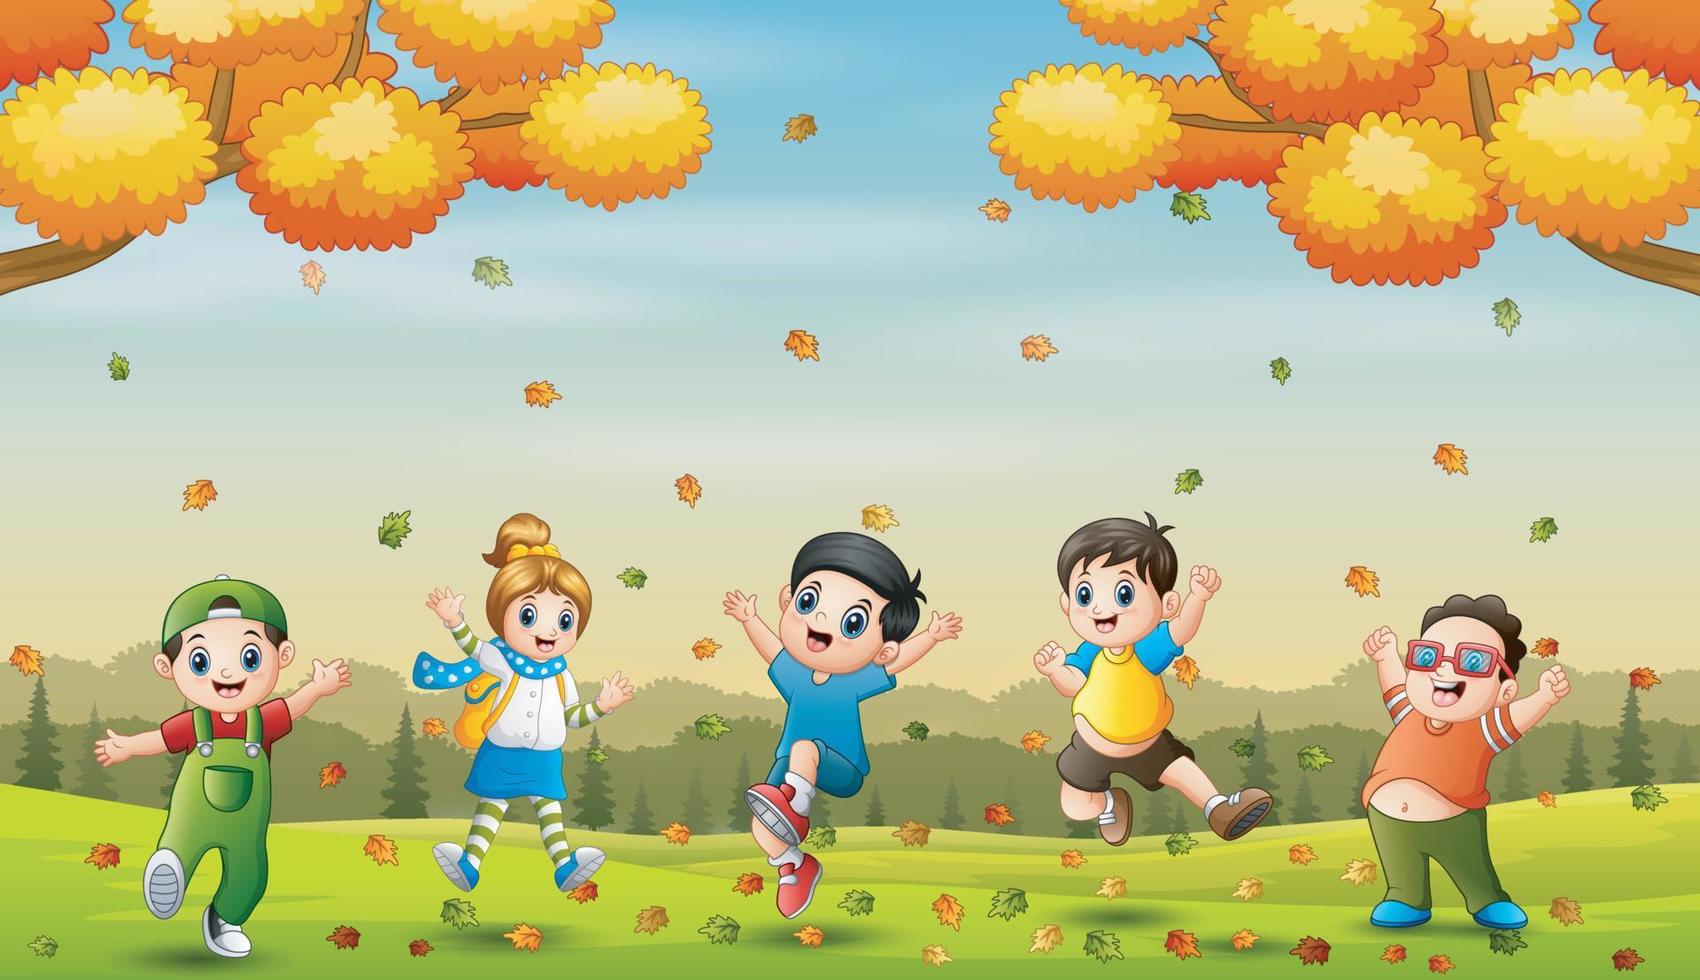 Cheerful little kids jumping and laughing in autumn landscape vector